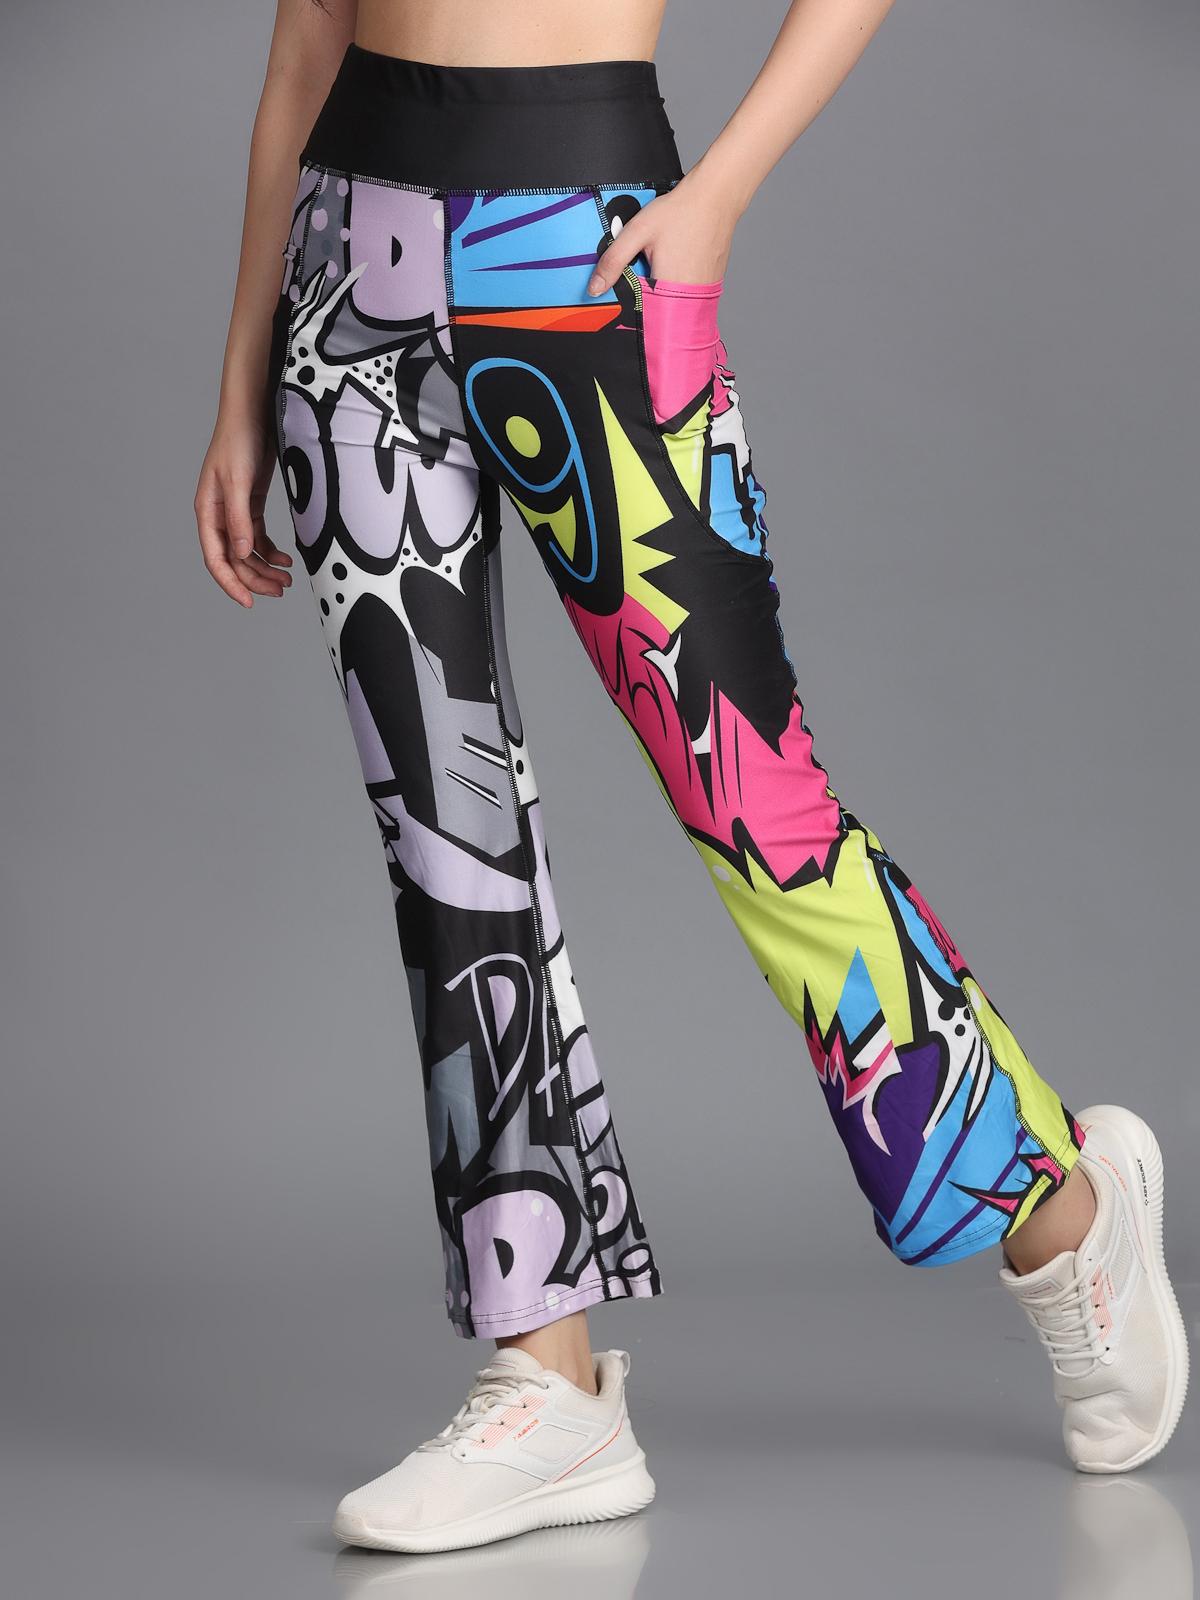 Women Stylish Printed Flared High Waist Yoga Pants with Side Pockets - XS  (24-26 inches)